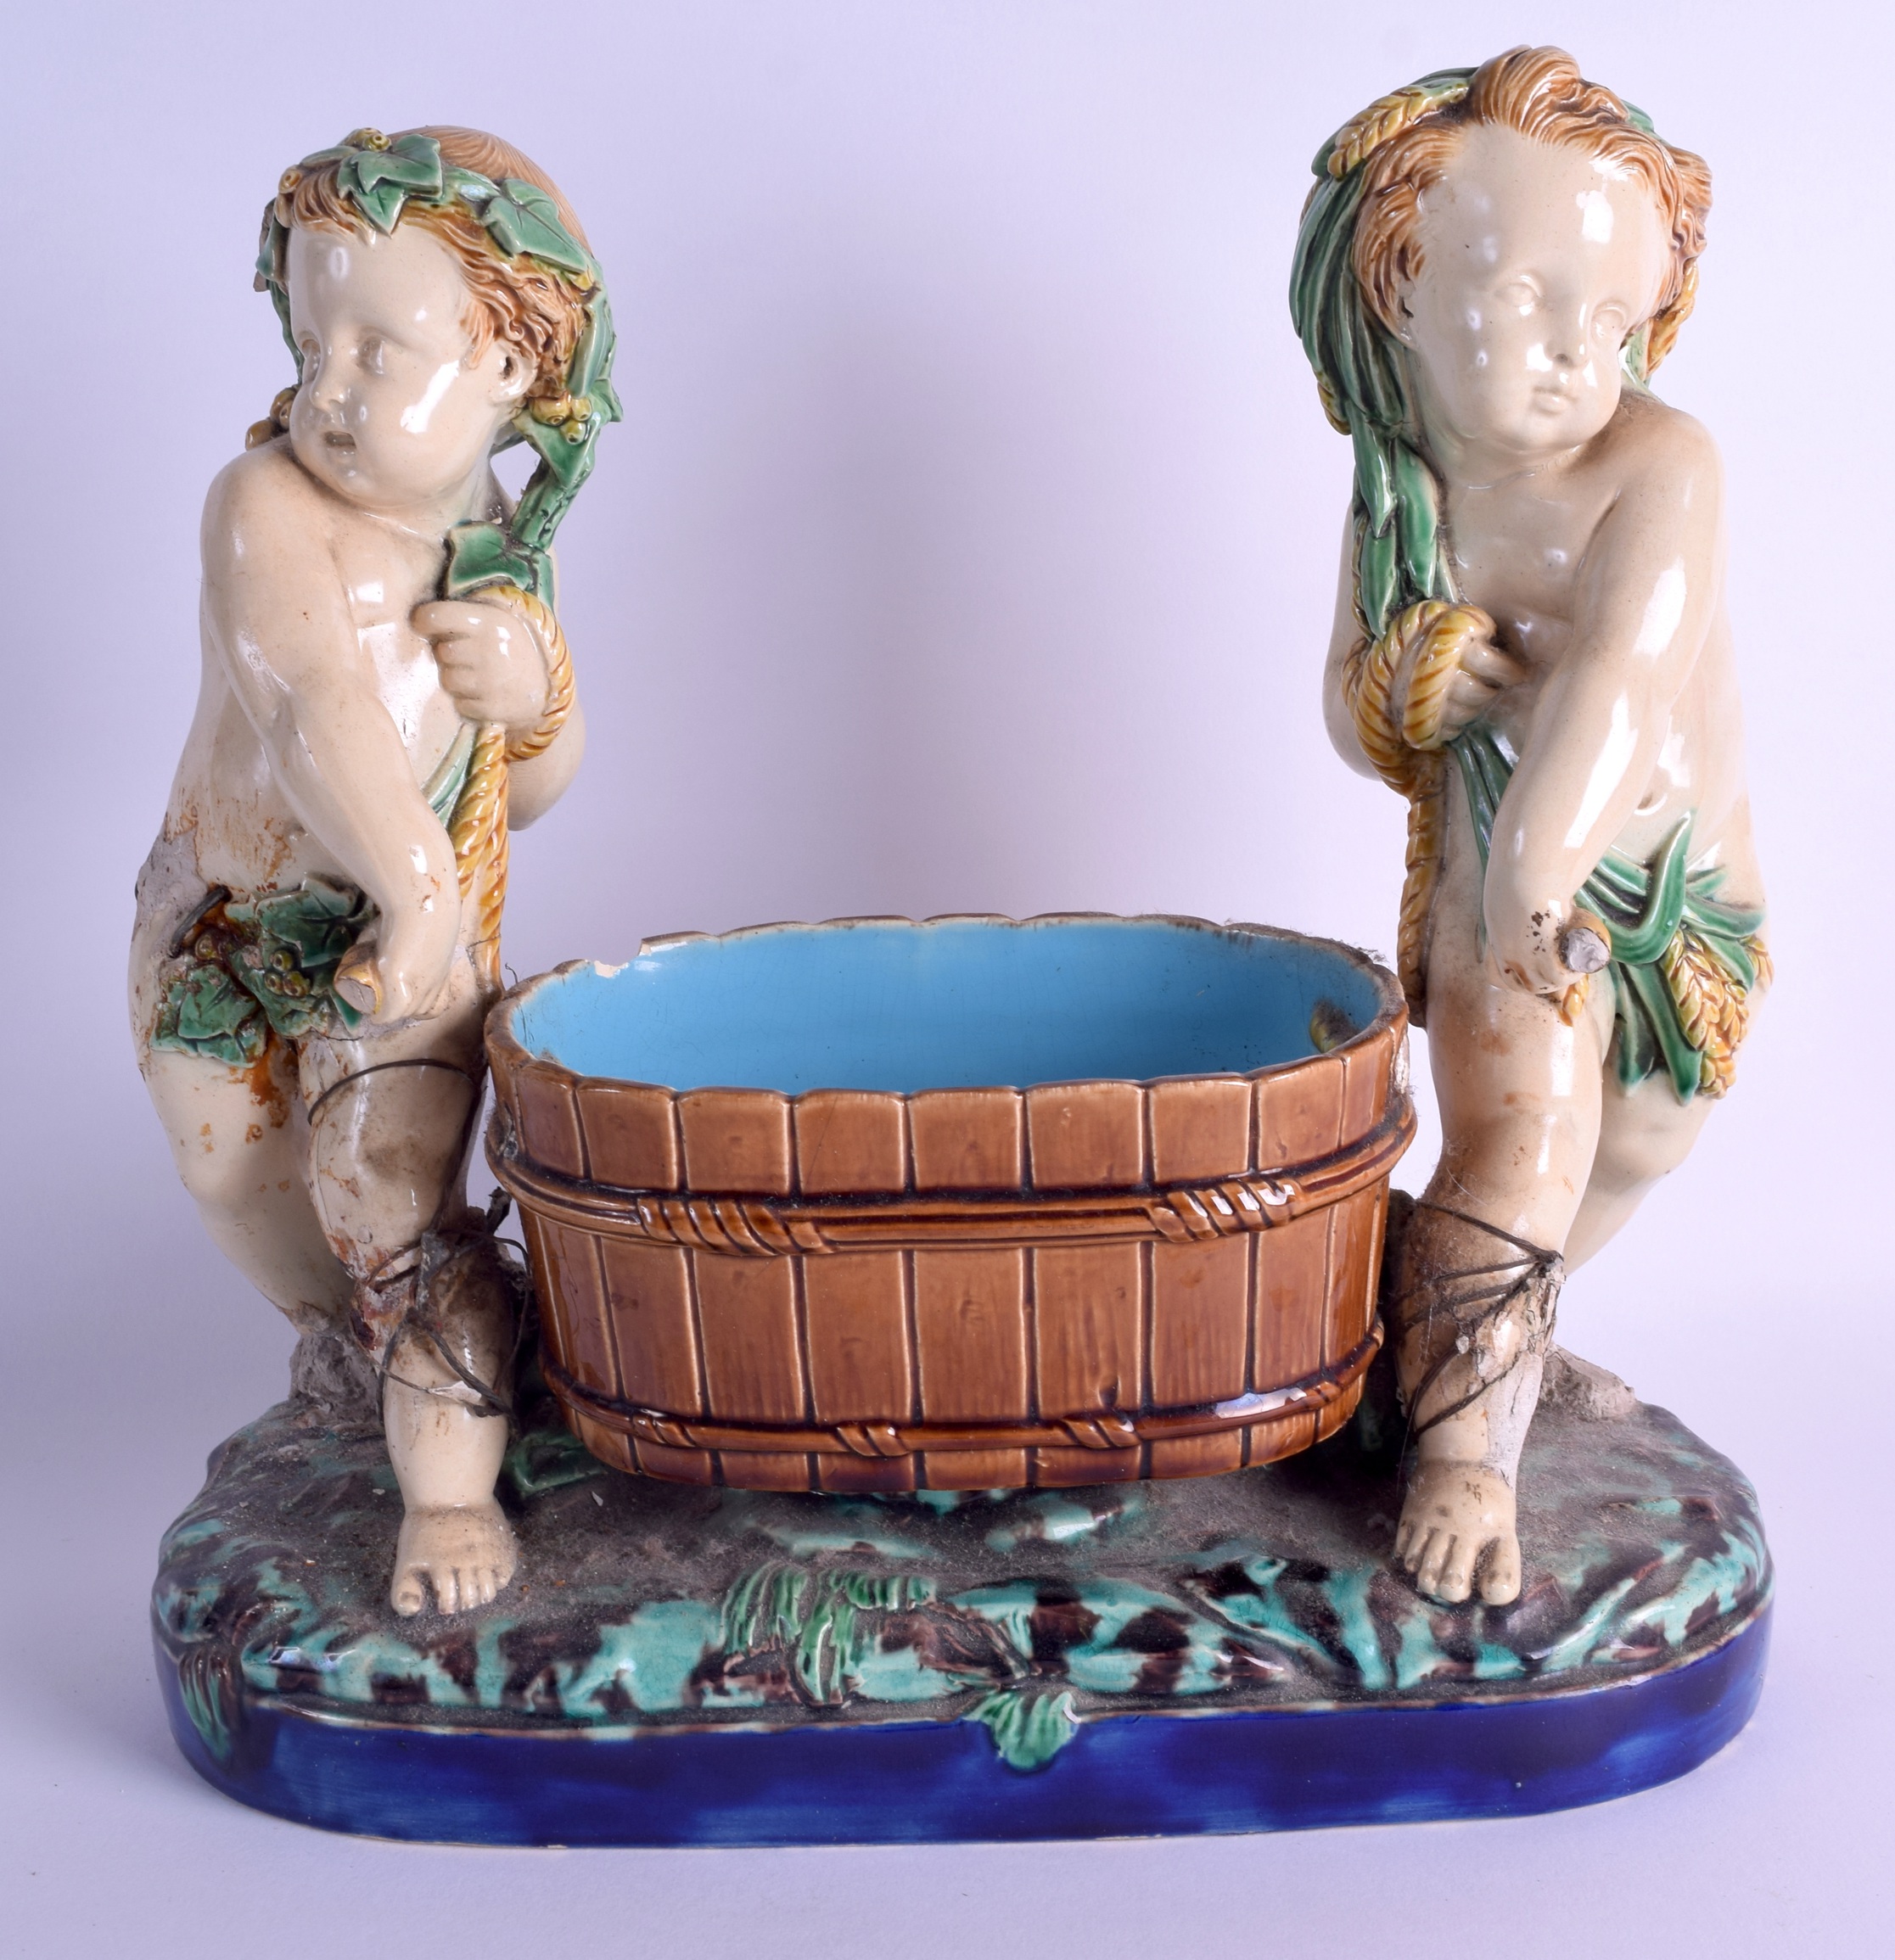 A 19TH CENTURY MINTON MAJOLICA FIGURAL GROUP depicting two putti covered in corn sheaths. 30 cm x 30